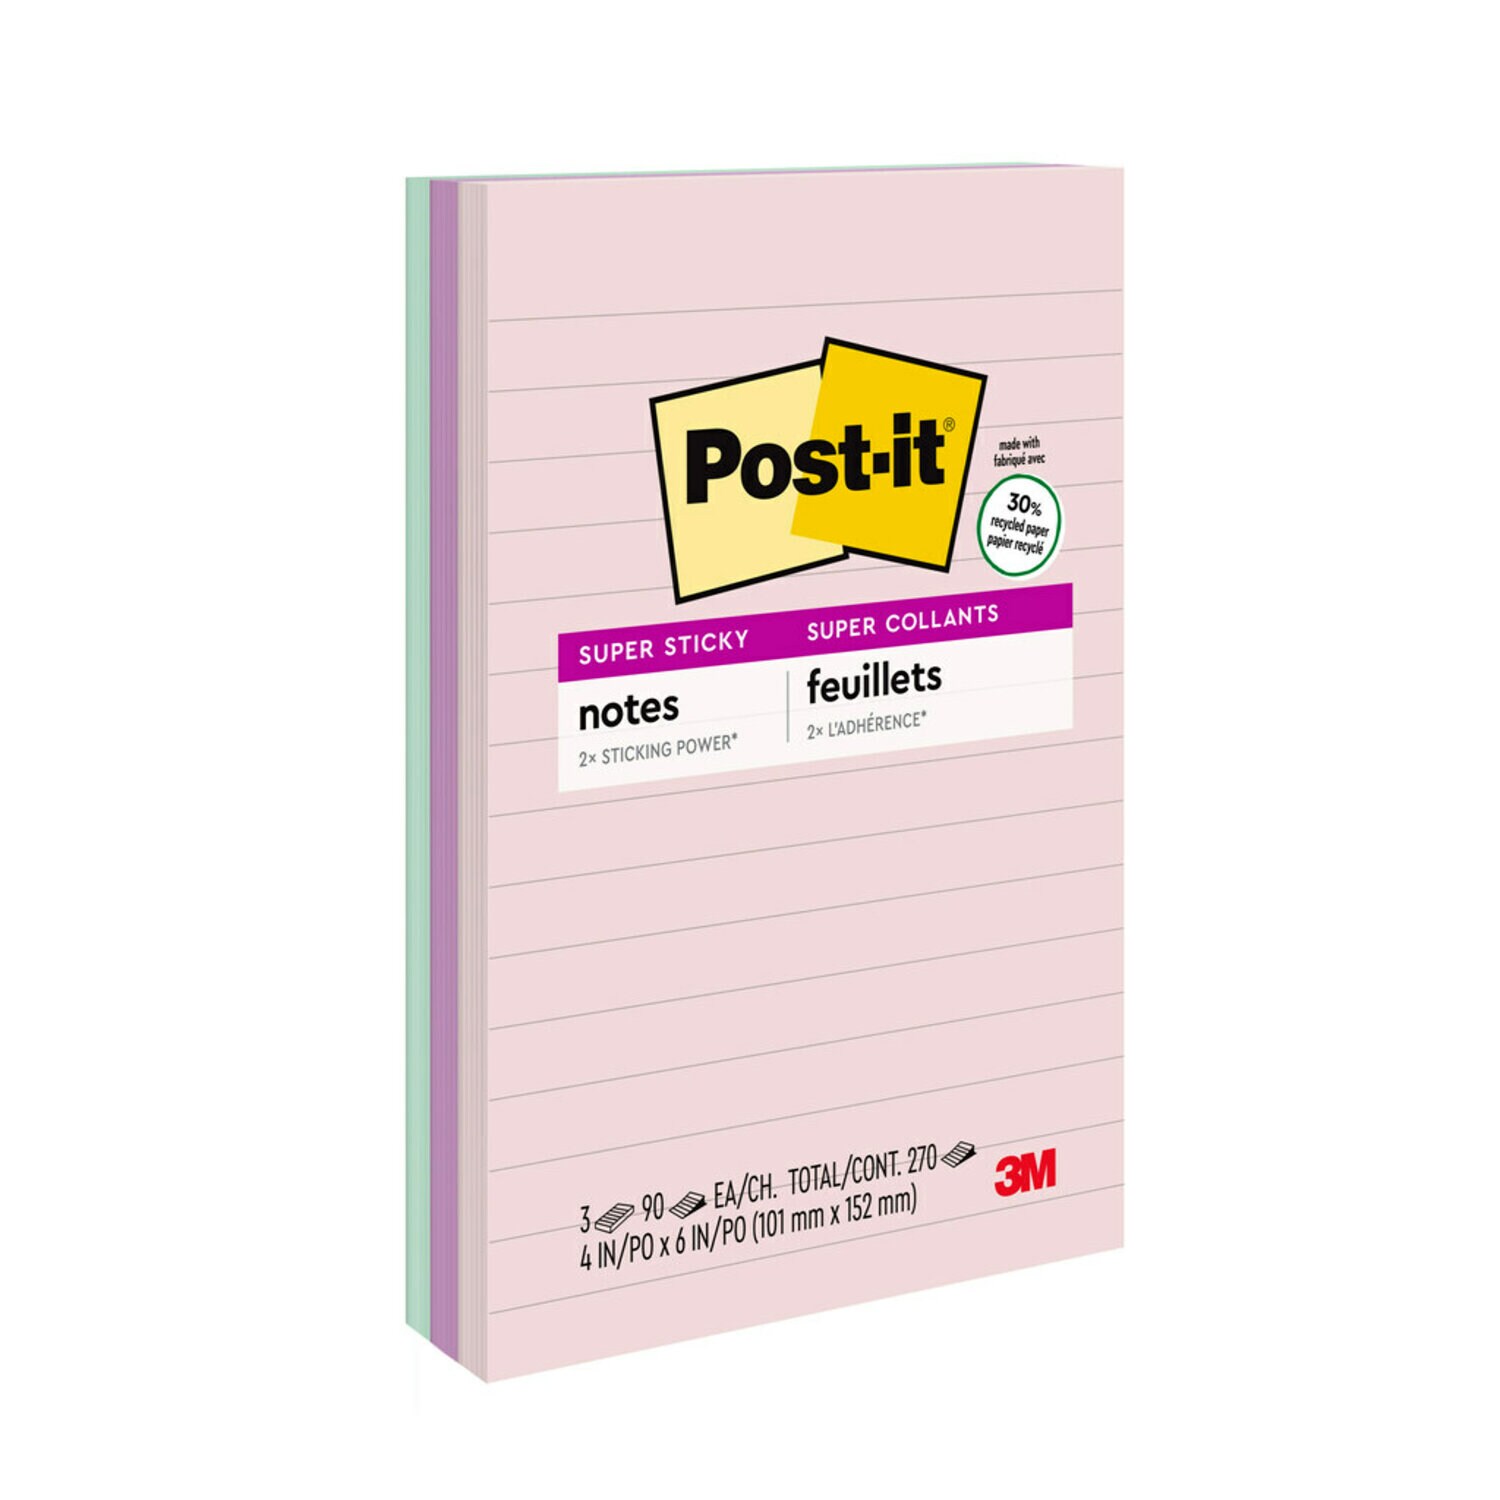 7100230240 - Post-it Super Sticky Recycled Notes 660-3SSNRP, 4 in x 6 in (101 mm x 152 mm), Wanderlust Pastels Collection